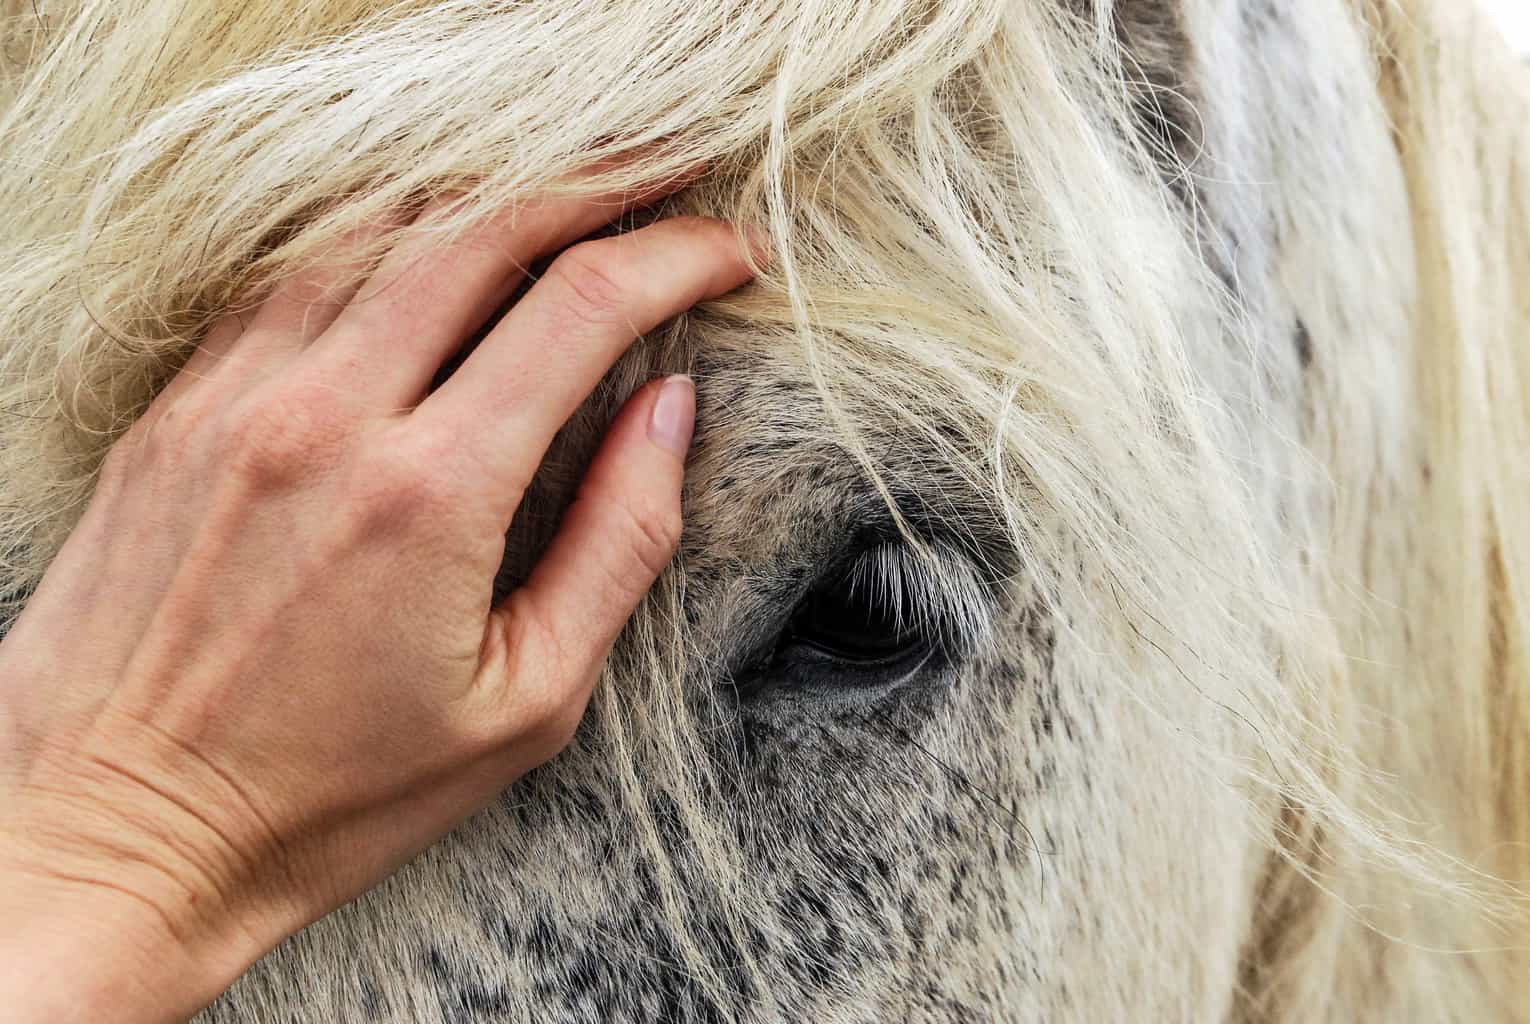 Healing Horses With Reiki: Heart To Heart With Horses Part 2 | Animal  Wellness Guide